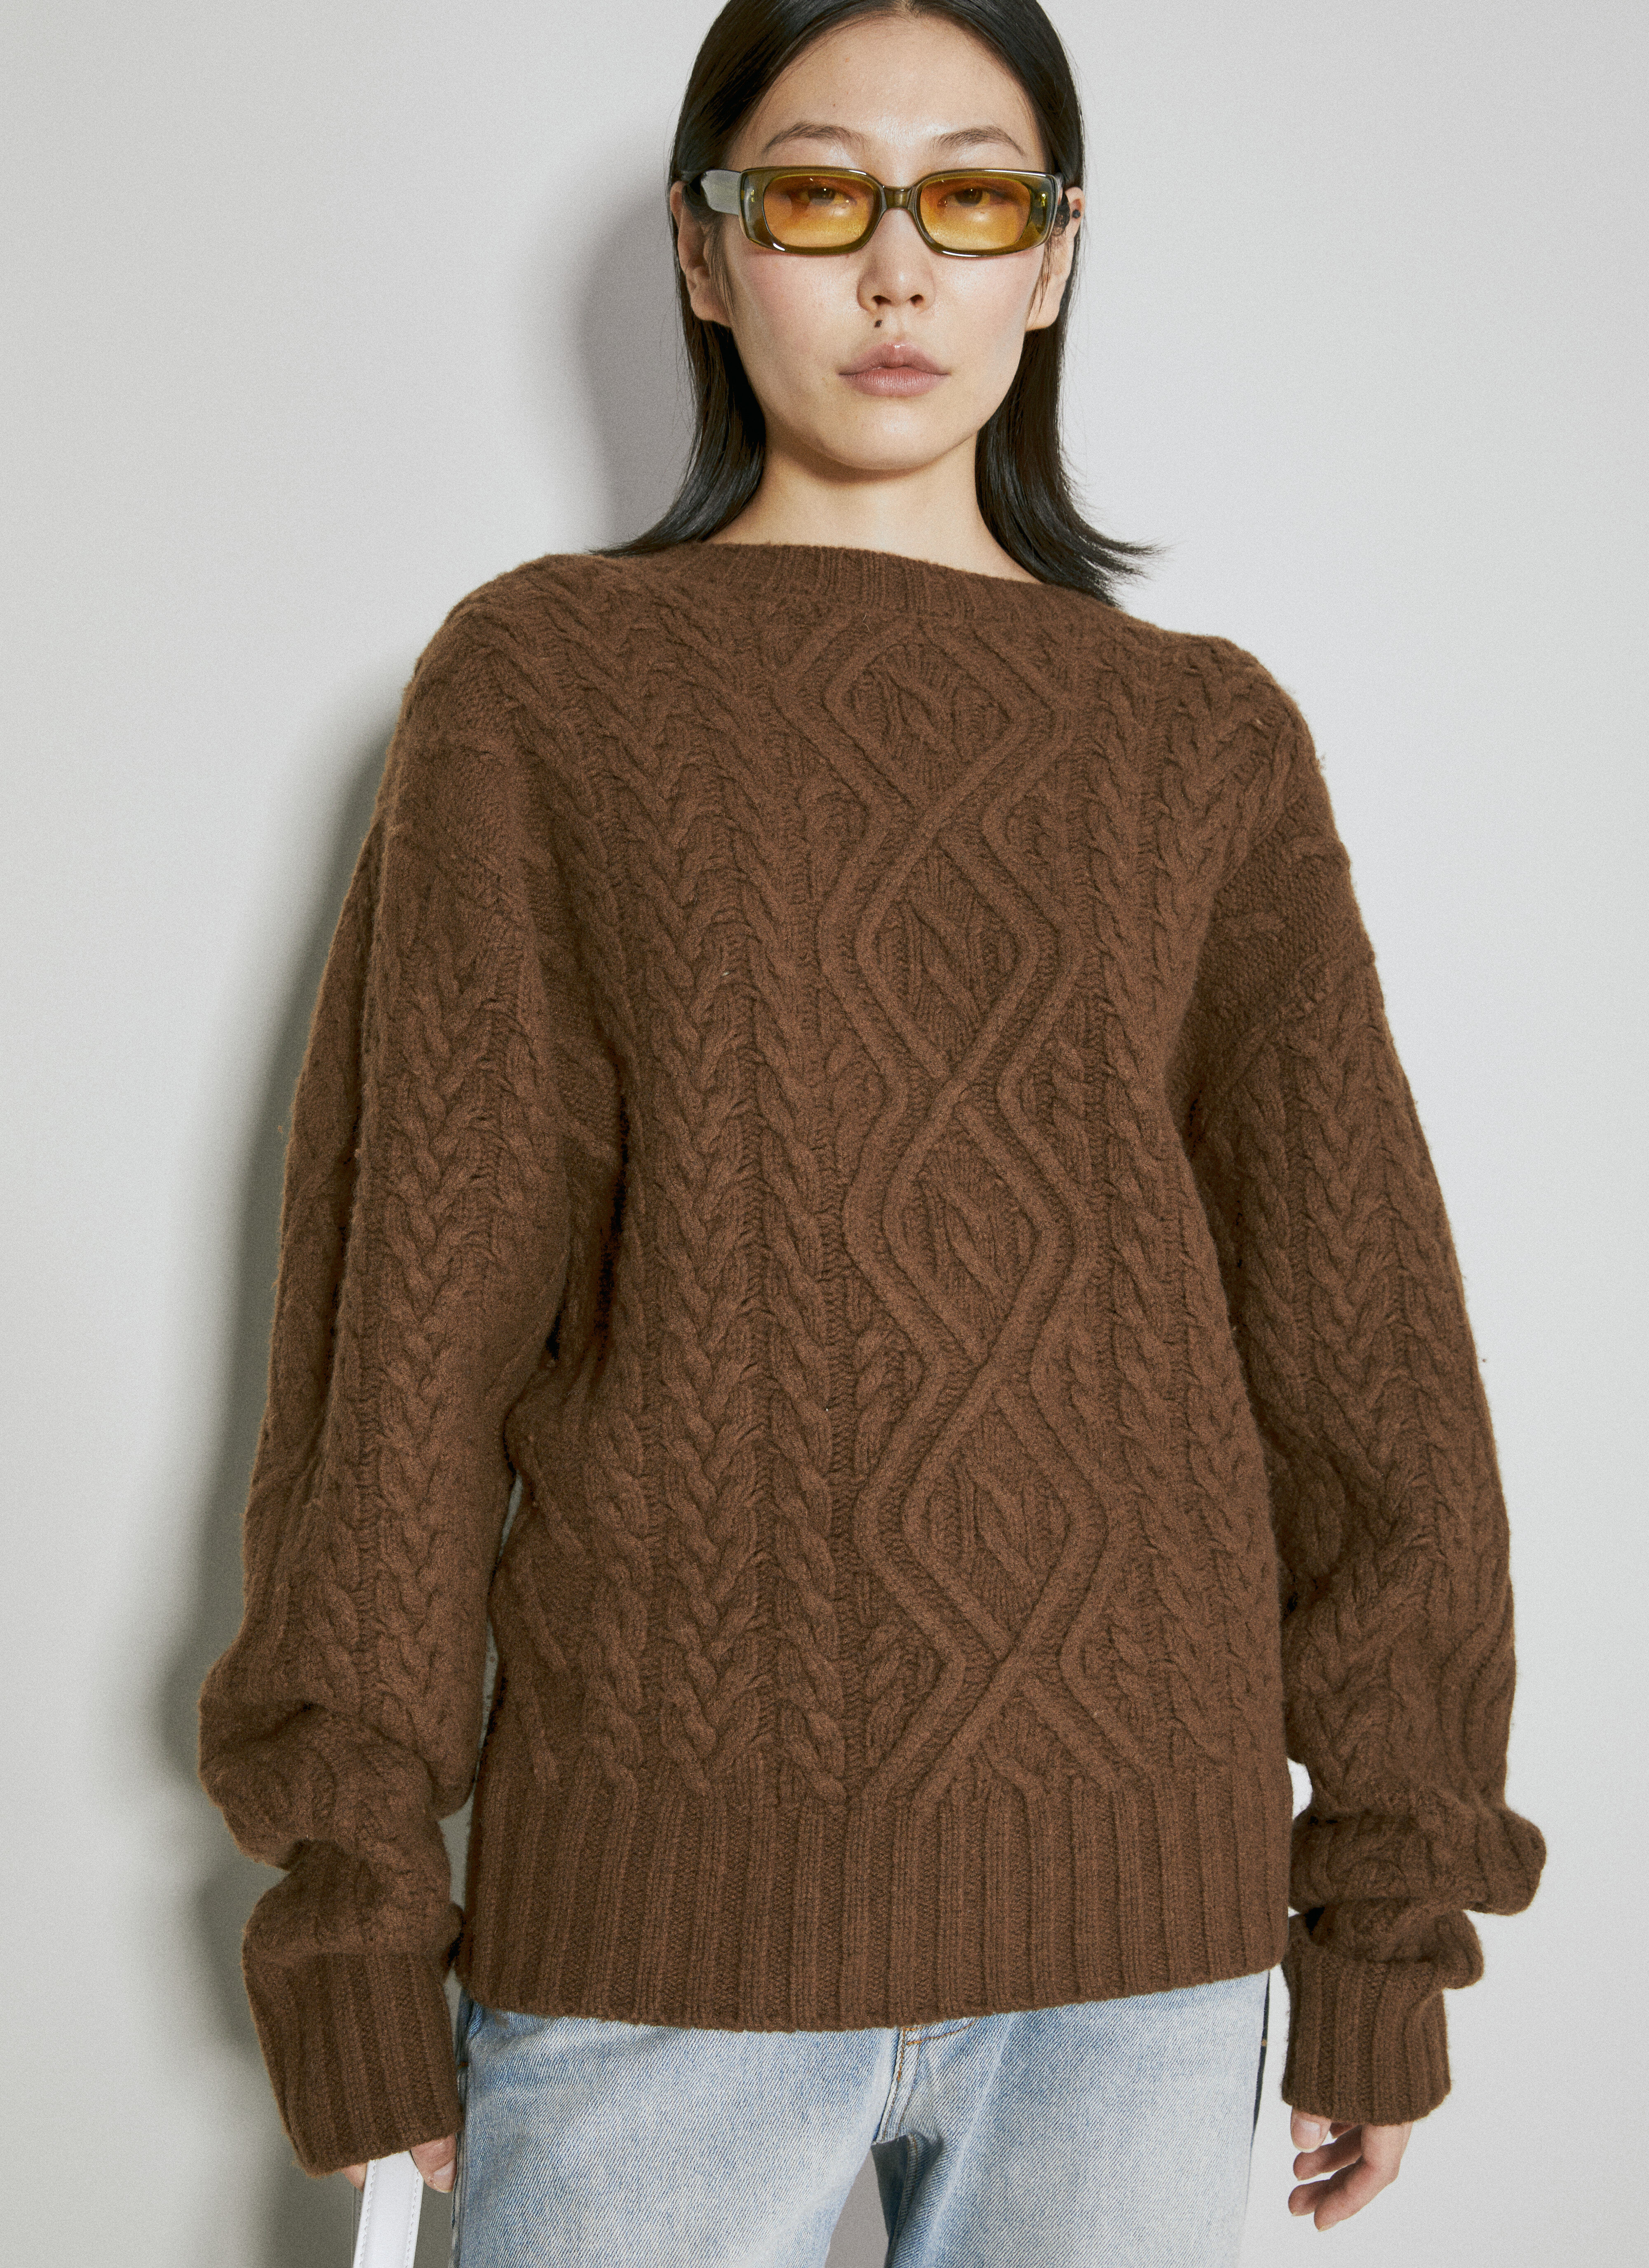 Martine Rose Wool Cable Knit Sweater Pink mtr0255002